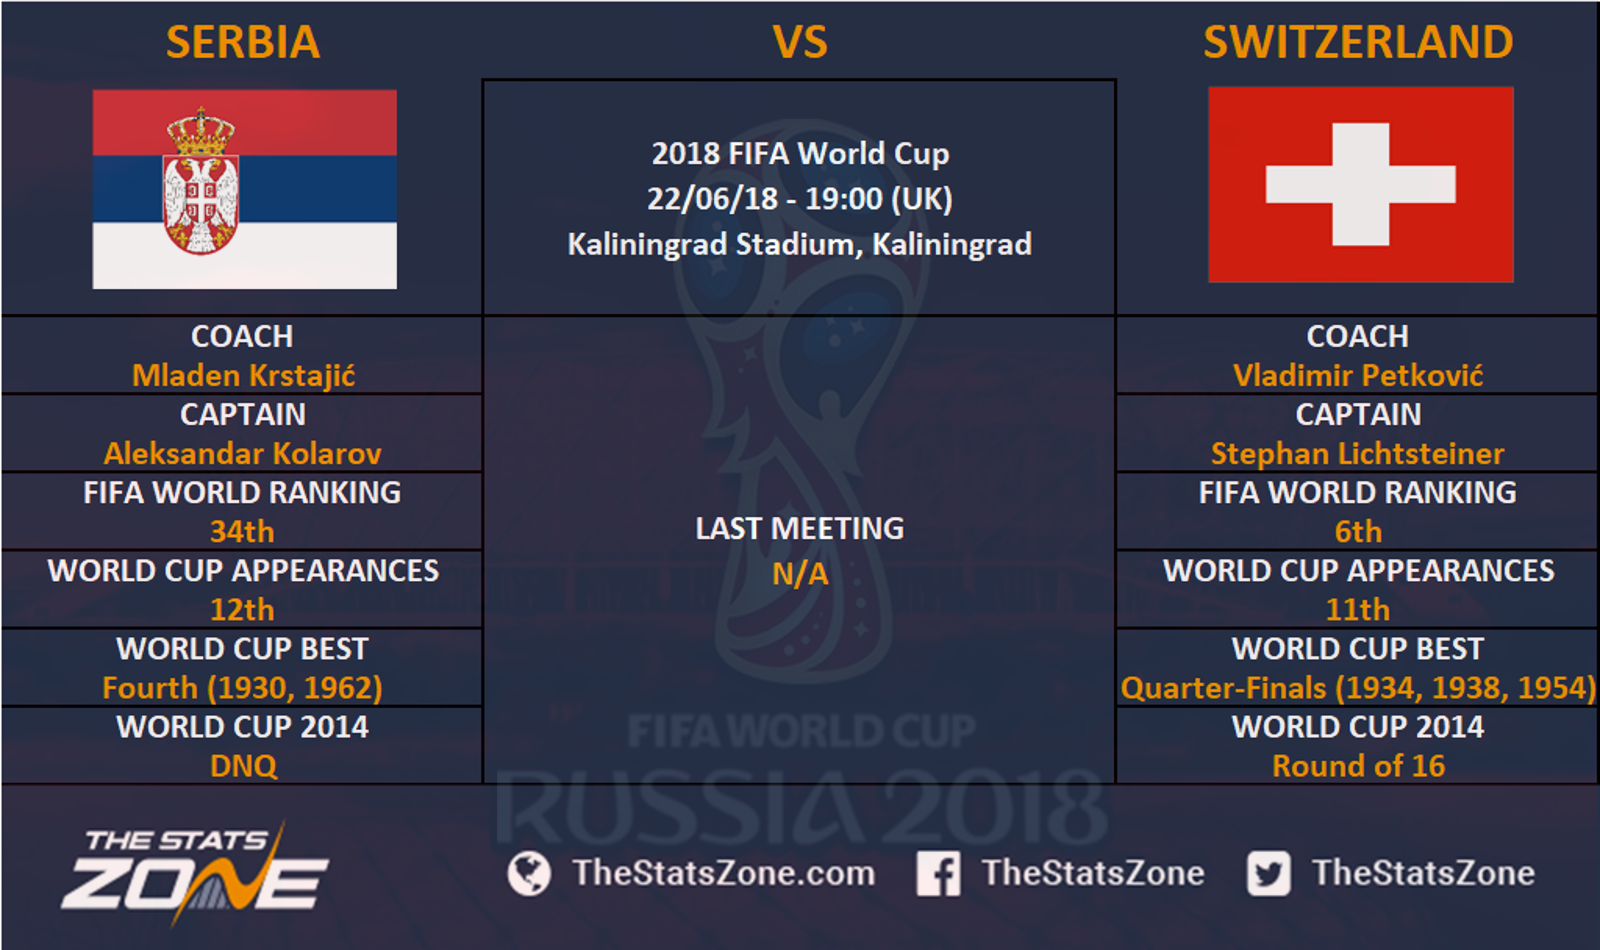 2018 FIFA World Cup – Serbia vs Switzerland Preview - The Stats Zone